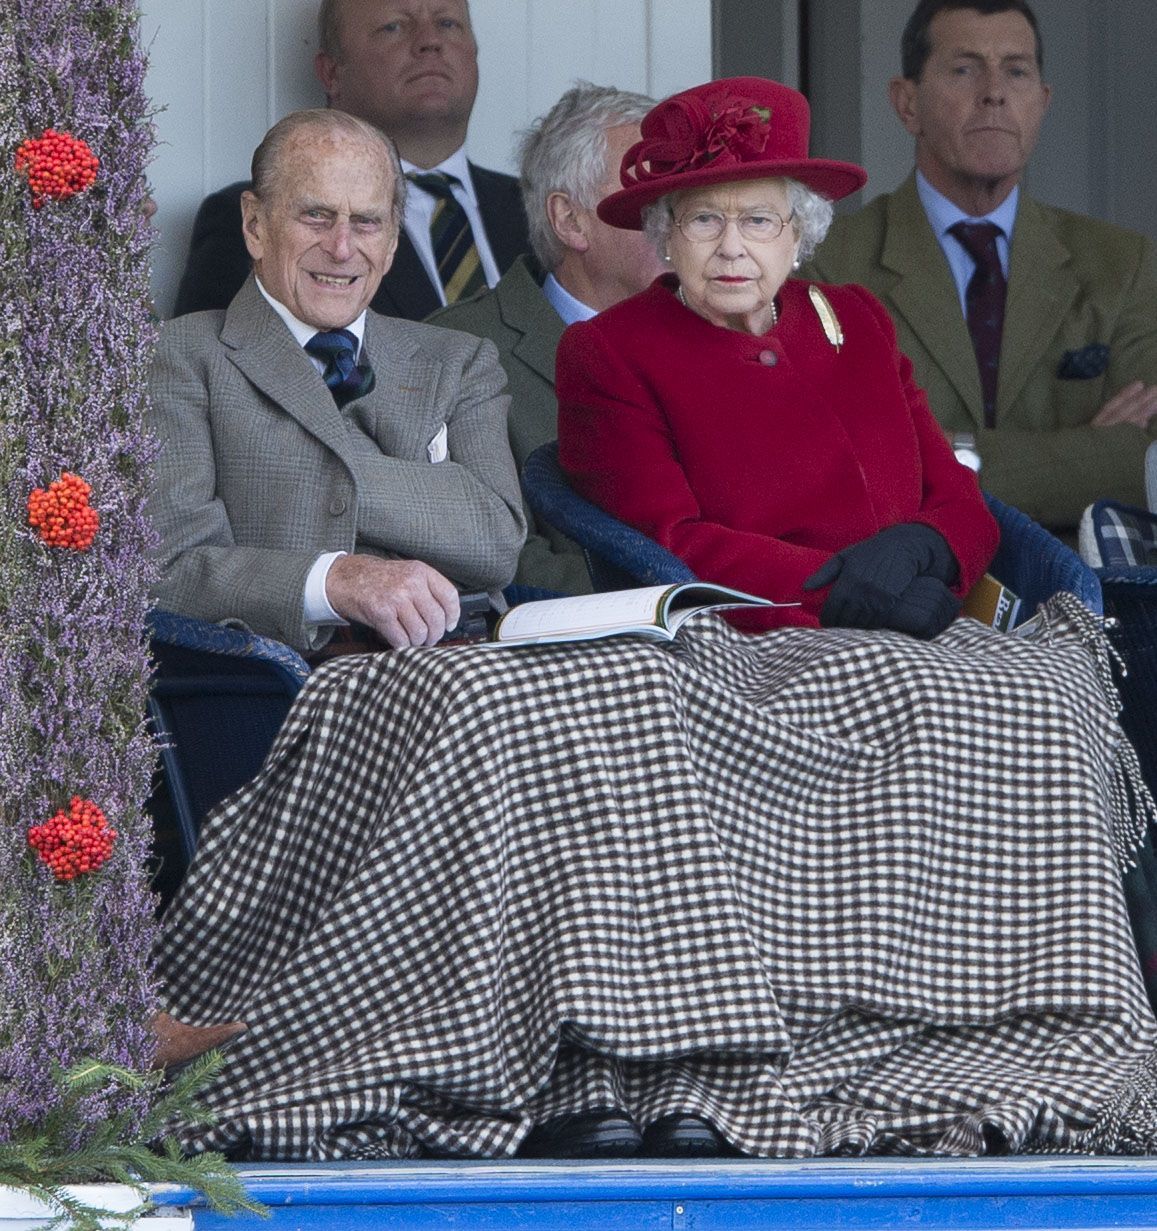 <p>Keeping cozy! Prince Philip, Duke of Edinburgh, and Queen Elizabeth II cut the chill with a sturdy plaid blanket as they watched the Braemar Gathering at the Duke of Fife Memorial Park in Braemar, Scotland, on Sept. 5, 2015.</p>